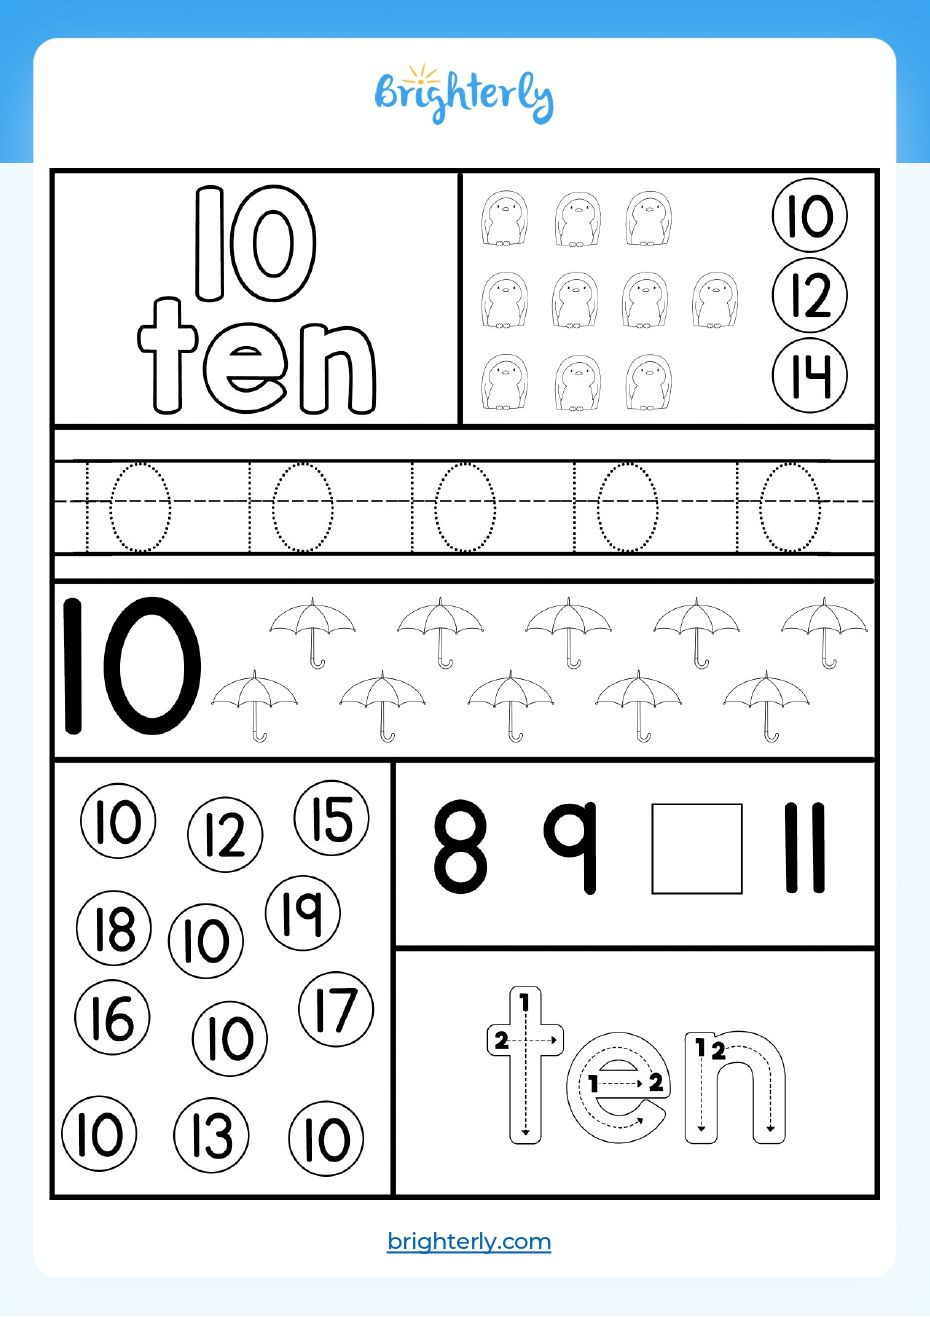 free-printable-number-10-ten-worksheets-for-kids-pdfs-brighterly